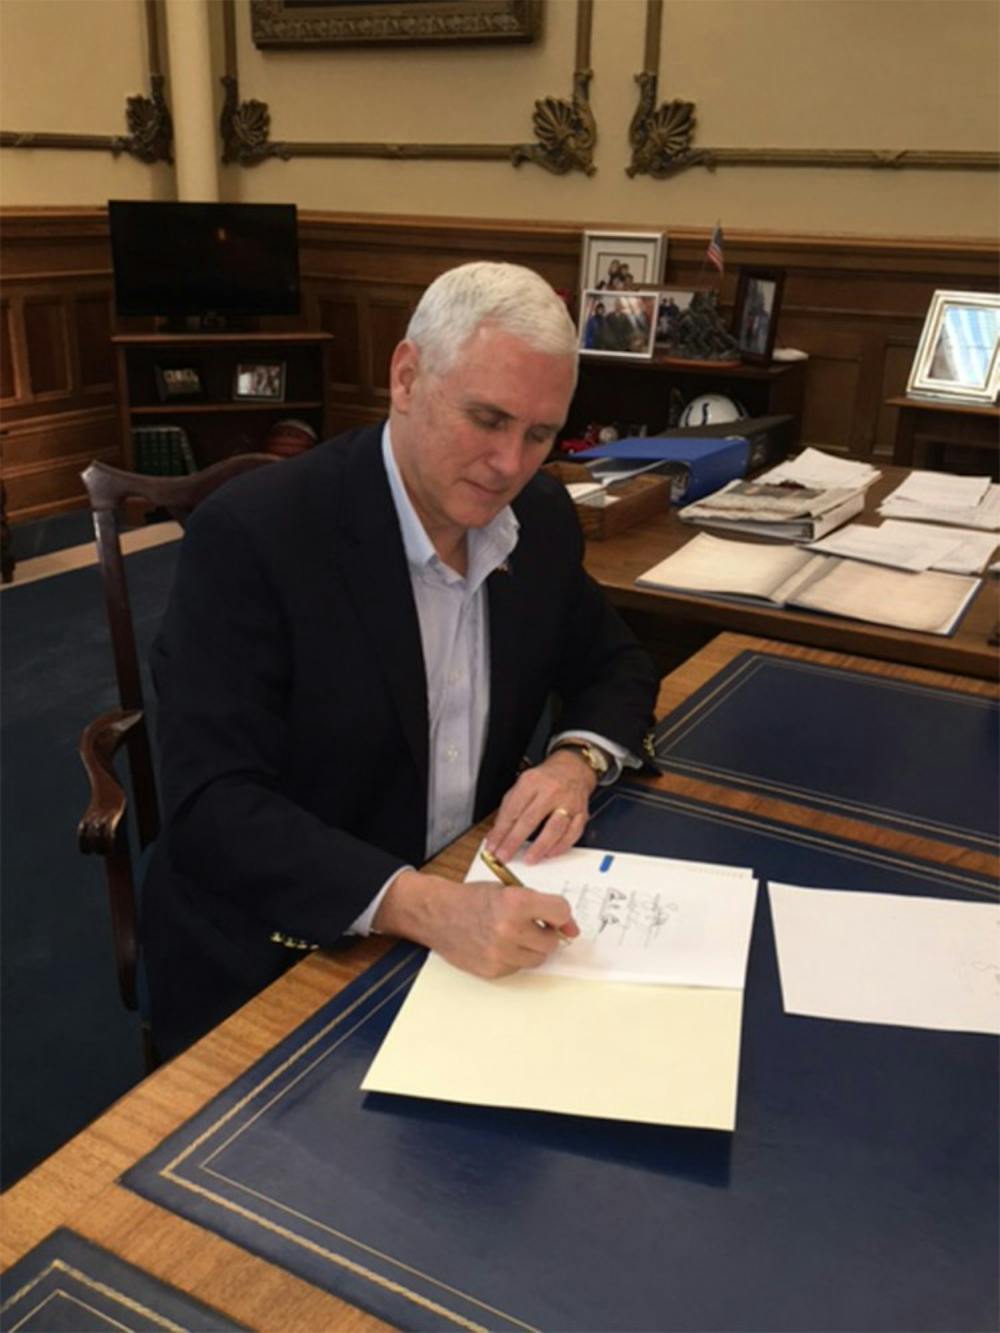 Governor Mike Pence signs SEA 91 last Friday. SEA 91 will open all adoption records finalized before 1994 unless a birth parent requests with the Indiana State Department of Health that the records remain sealed. The legislation goes into effect on July 1, 2018, thereby providing time to inform birth mothers about these changes. “SEA 91 expands opportunities for adopted Hoosiers seeking more information on their health and heritage even while ensuring that birthparents who choose to maintain their privacy are protected, and I am pleased to sign it into law,” said Governor Pence. “I want Indiana to be known as the most pro-adoption state in America and SEA 91 will give greater clarity and compassion to our adoption laws.”